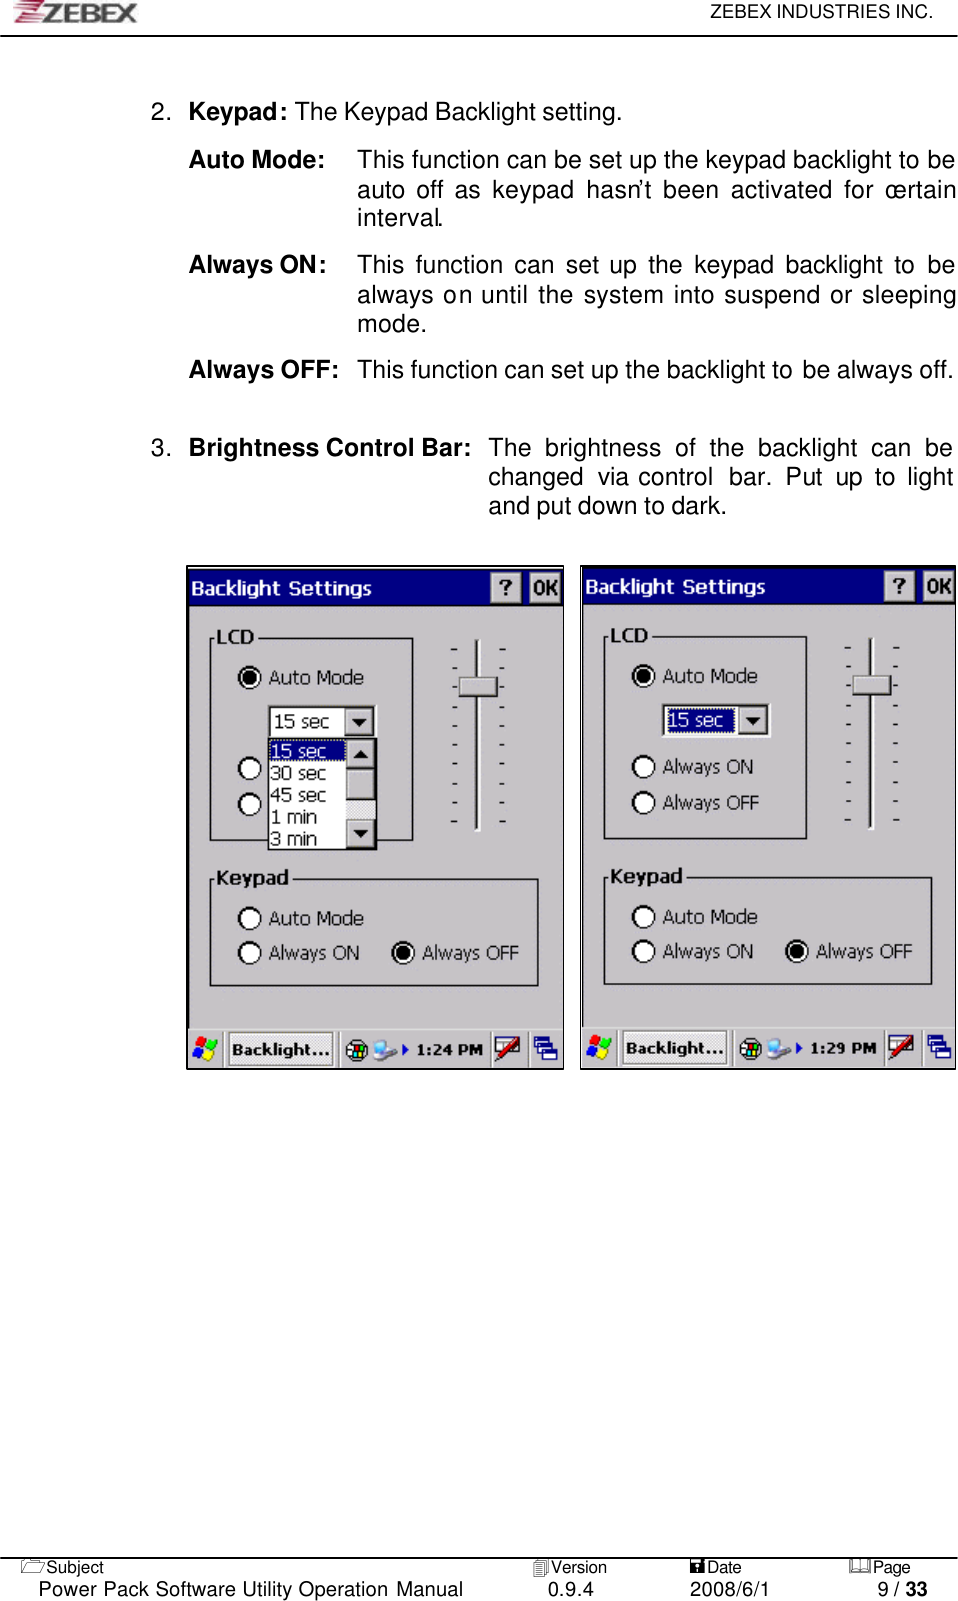     ZEBEX INDUSTRIES INC.   1Subject 4Version           =Date &amp;Page  Power Pack Software Utility Operation Manual 0.9.4    2008/6/1          9 / 33  2. Keypad: The Keypad Backlight setting.   Auto Mode:    This function can be set up the keypad backlight to be auto off as keypad hasn’t been activated for certain interval.  Always ON: This function can set up the keypad backlight to be always on until the system into suspend or sleeping mode.  Always OFF: This function can set up the backlight to be always off.   3. Brightness Control Bar:   The brightness of the backlight can be changed  via control  bar.  Put up to light and put down to dark.             